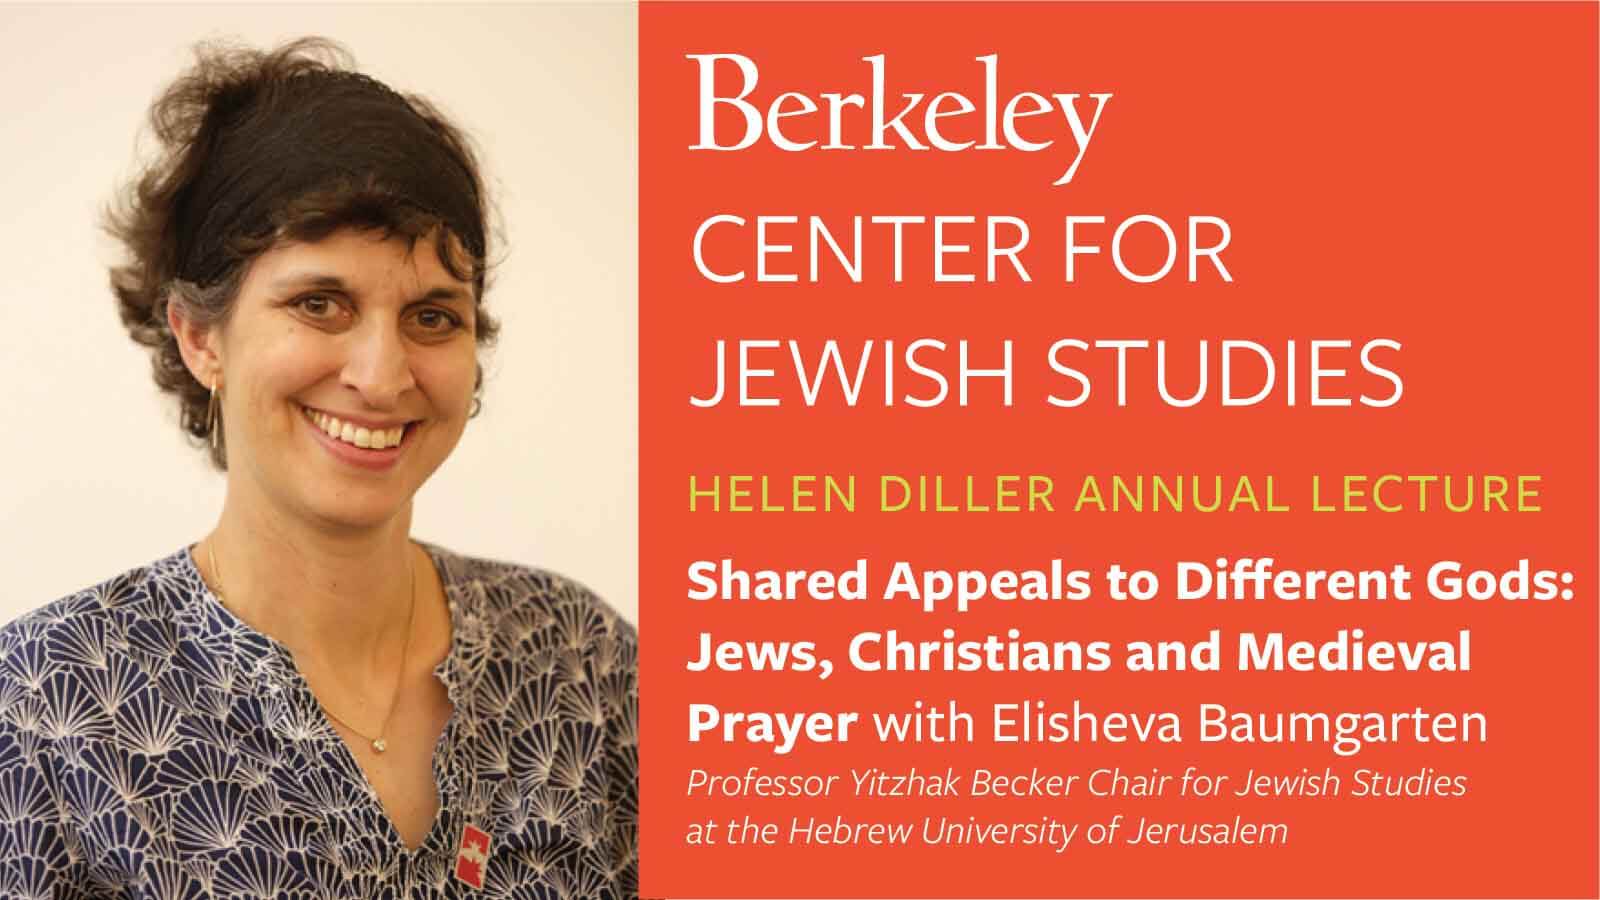 Shared Appeals to Different Gods: Jews, Christians and Medieval Prayer